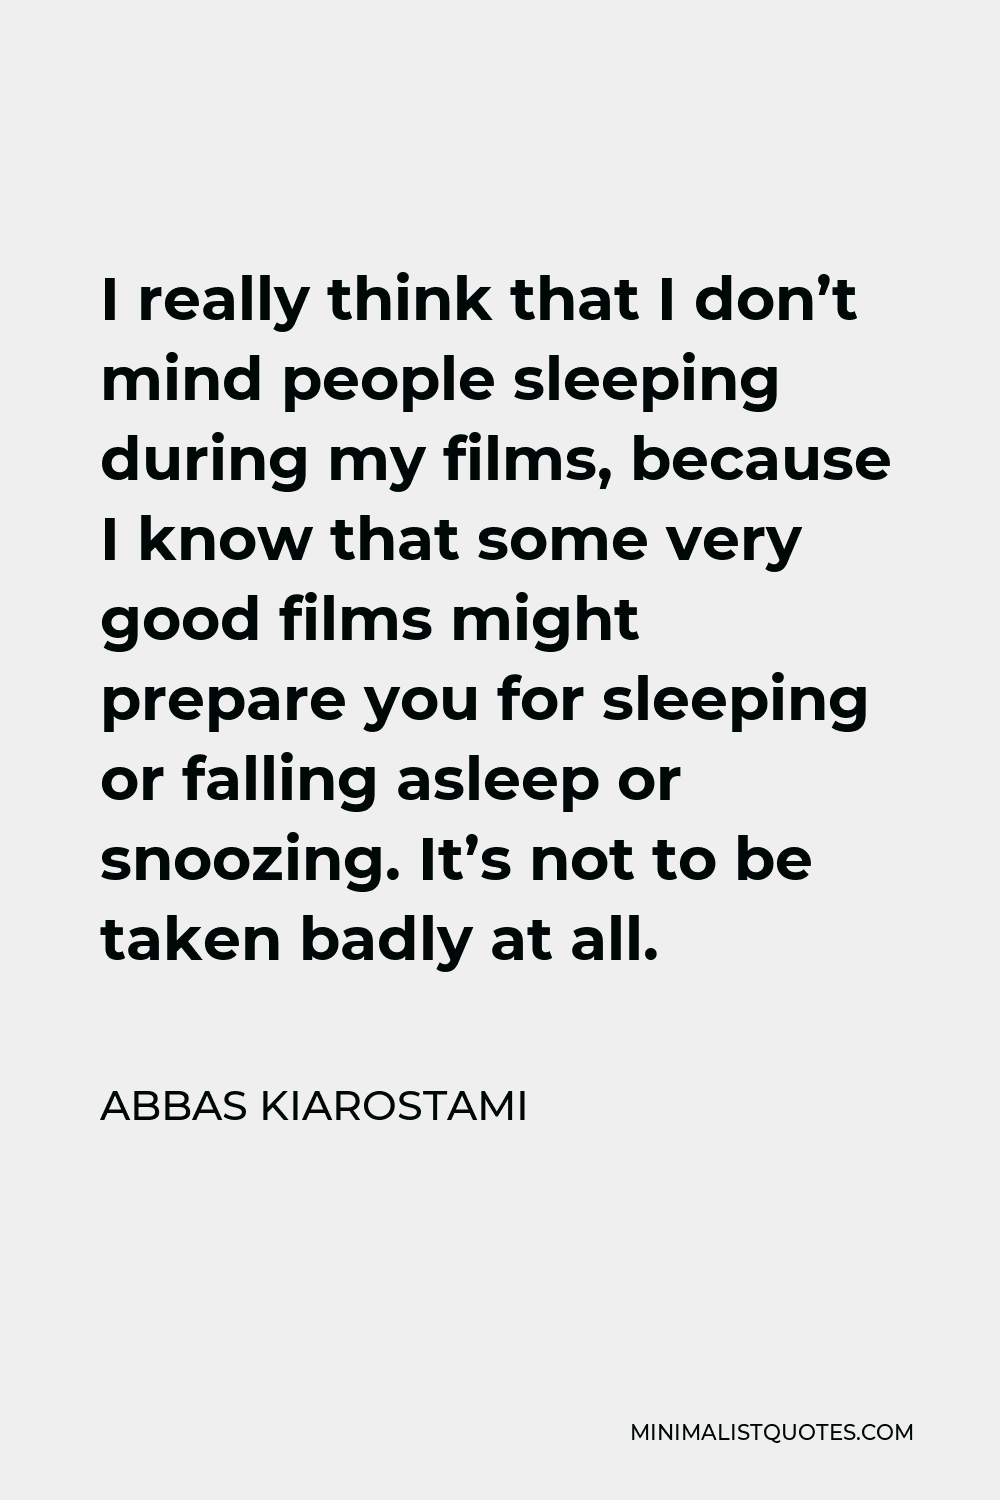 Abbas Kiarostami Quote - I really think that I don’t mind people sleeping during my films, because I know that some very good films might prepare you for sleeping or falling asleep or snoozing. It’s not to be taken badly at all.